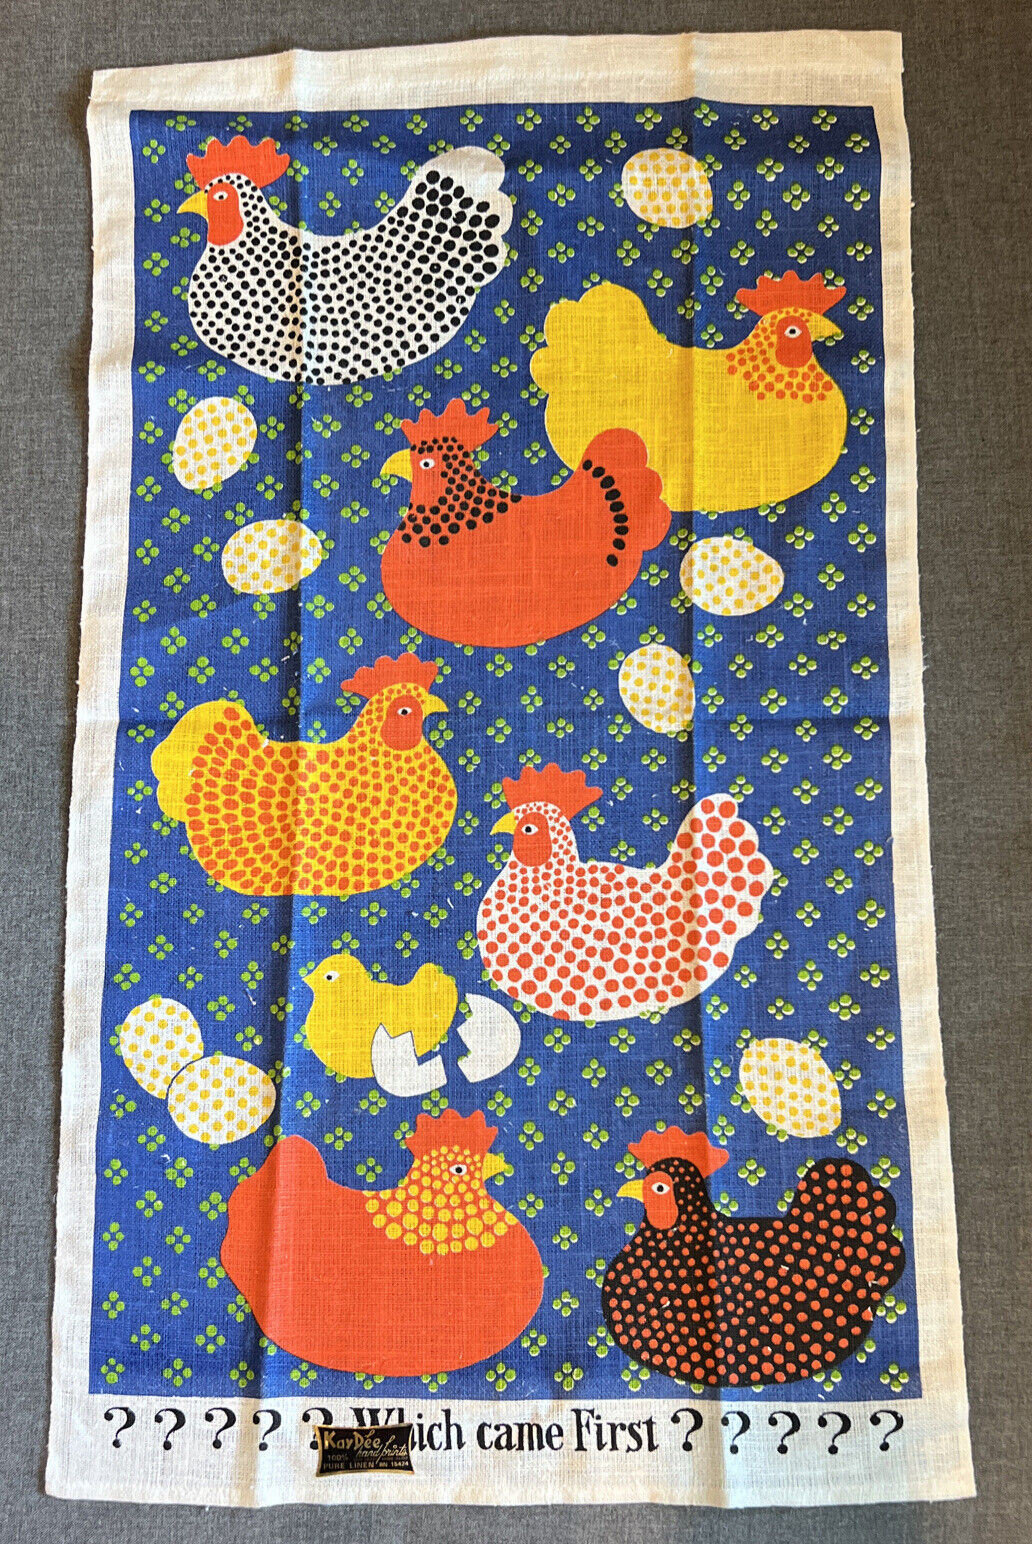 Vintage Kay Dee Handprints Linen Tea Towel Chicken “Which Came First?”